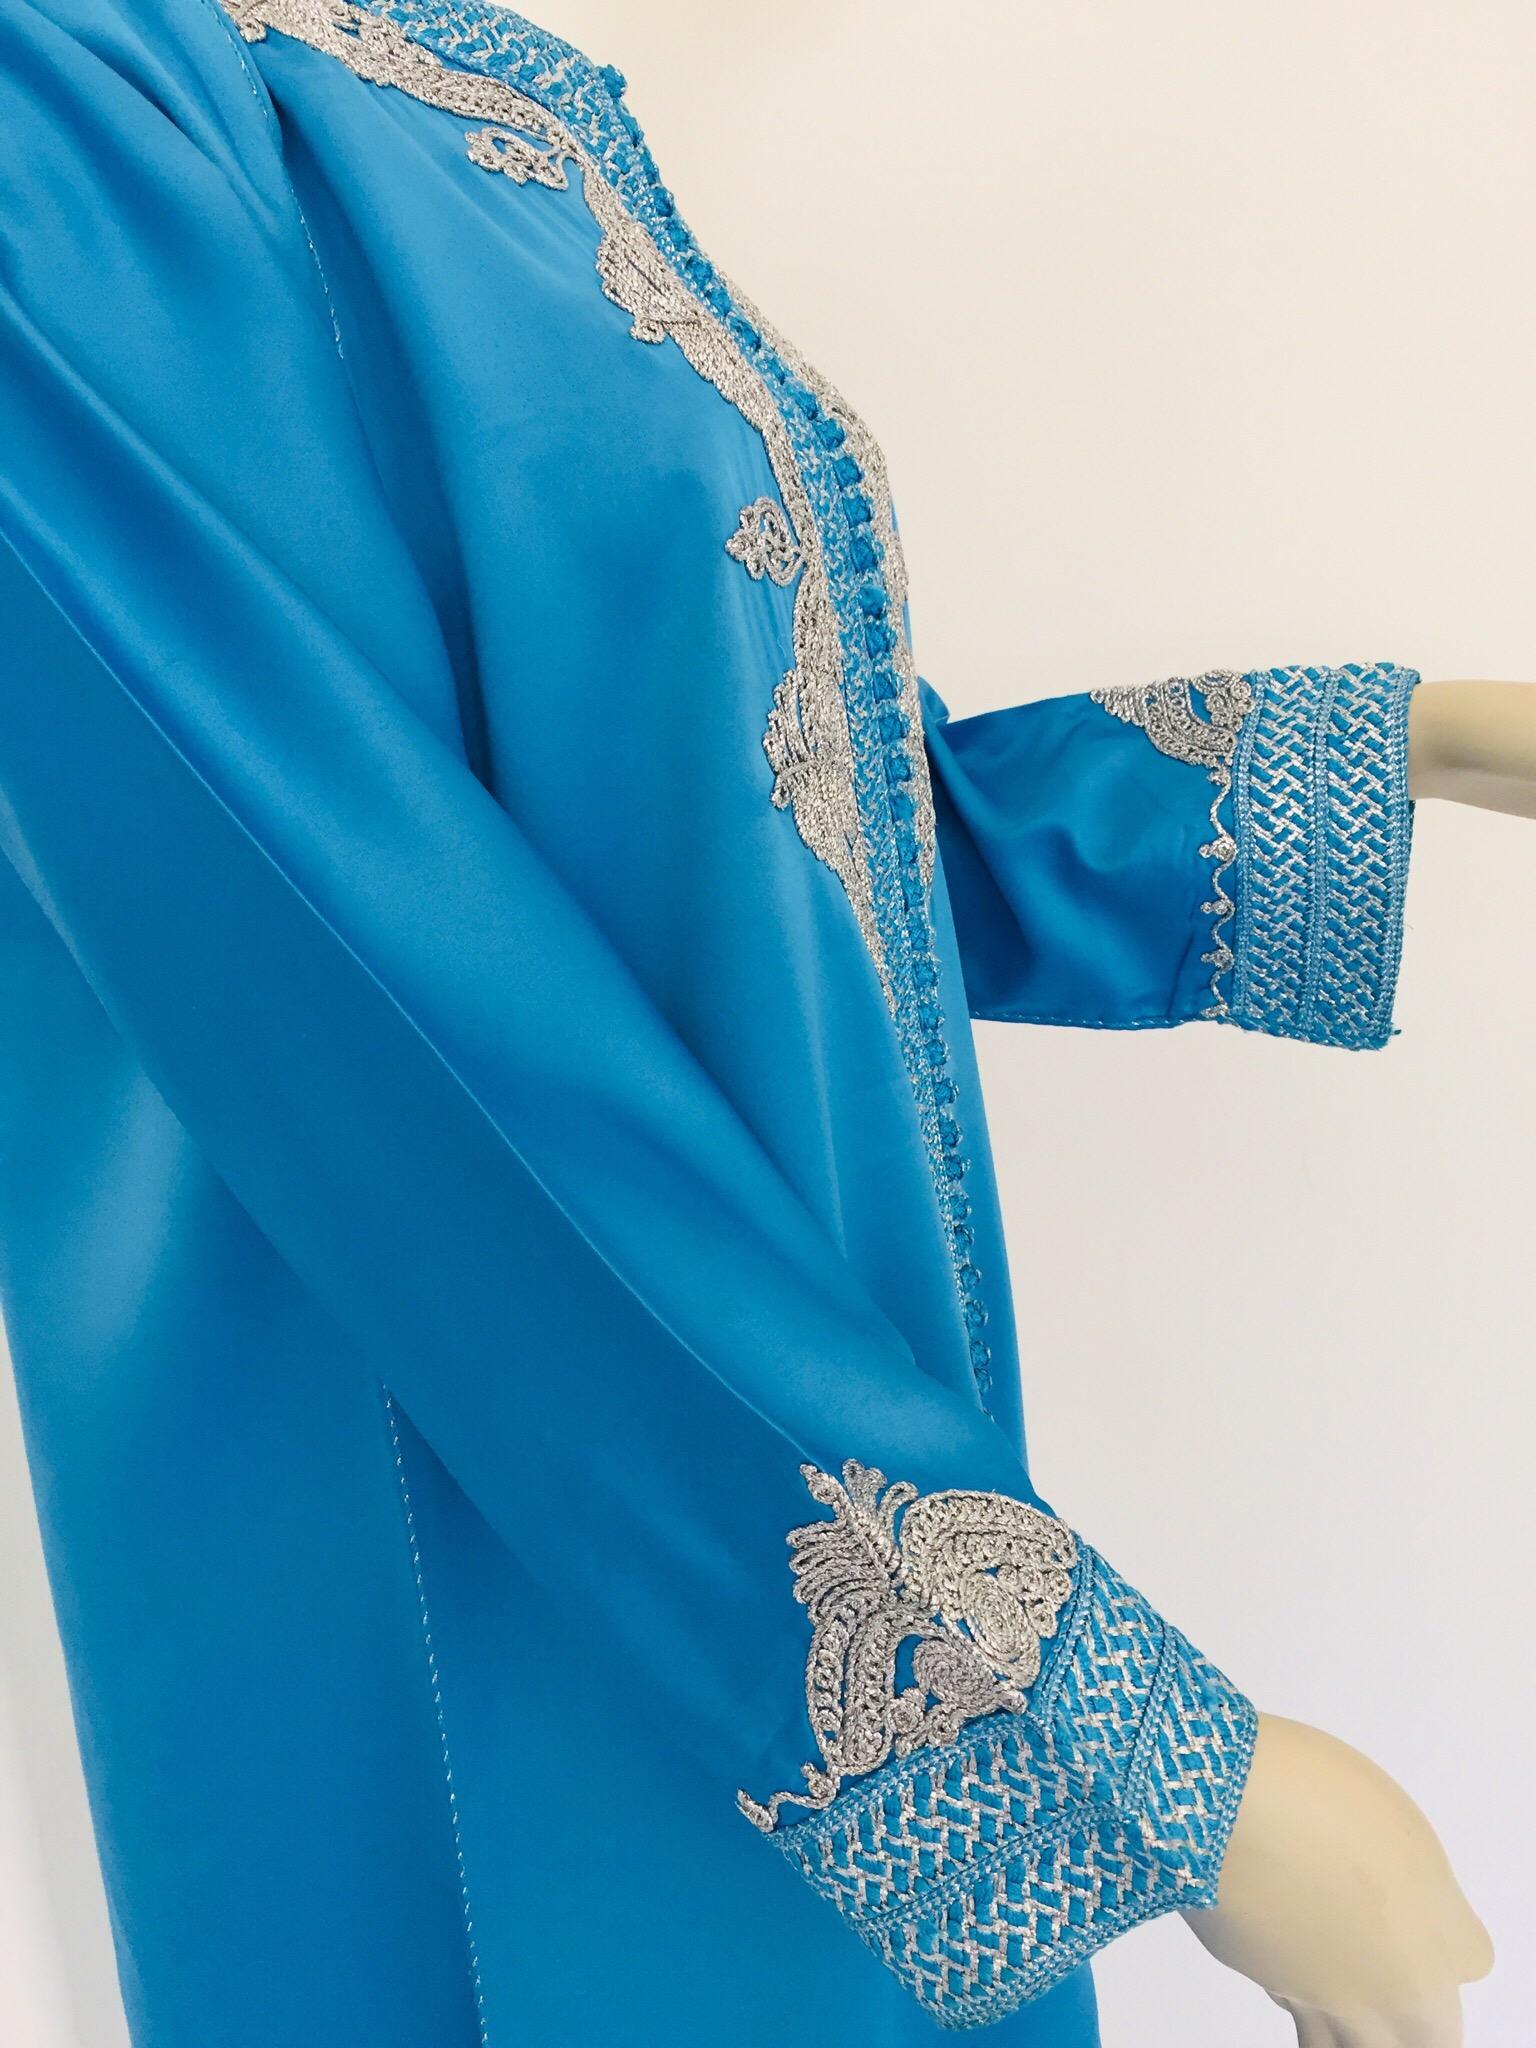 Moroccan Kaftan in Turquoise Blue and Silver In Good Condition For Sale In North Hollywood, CA